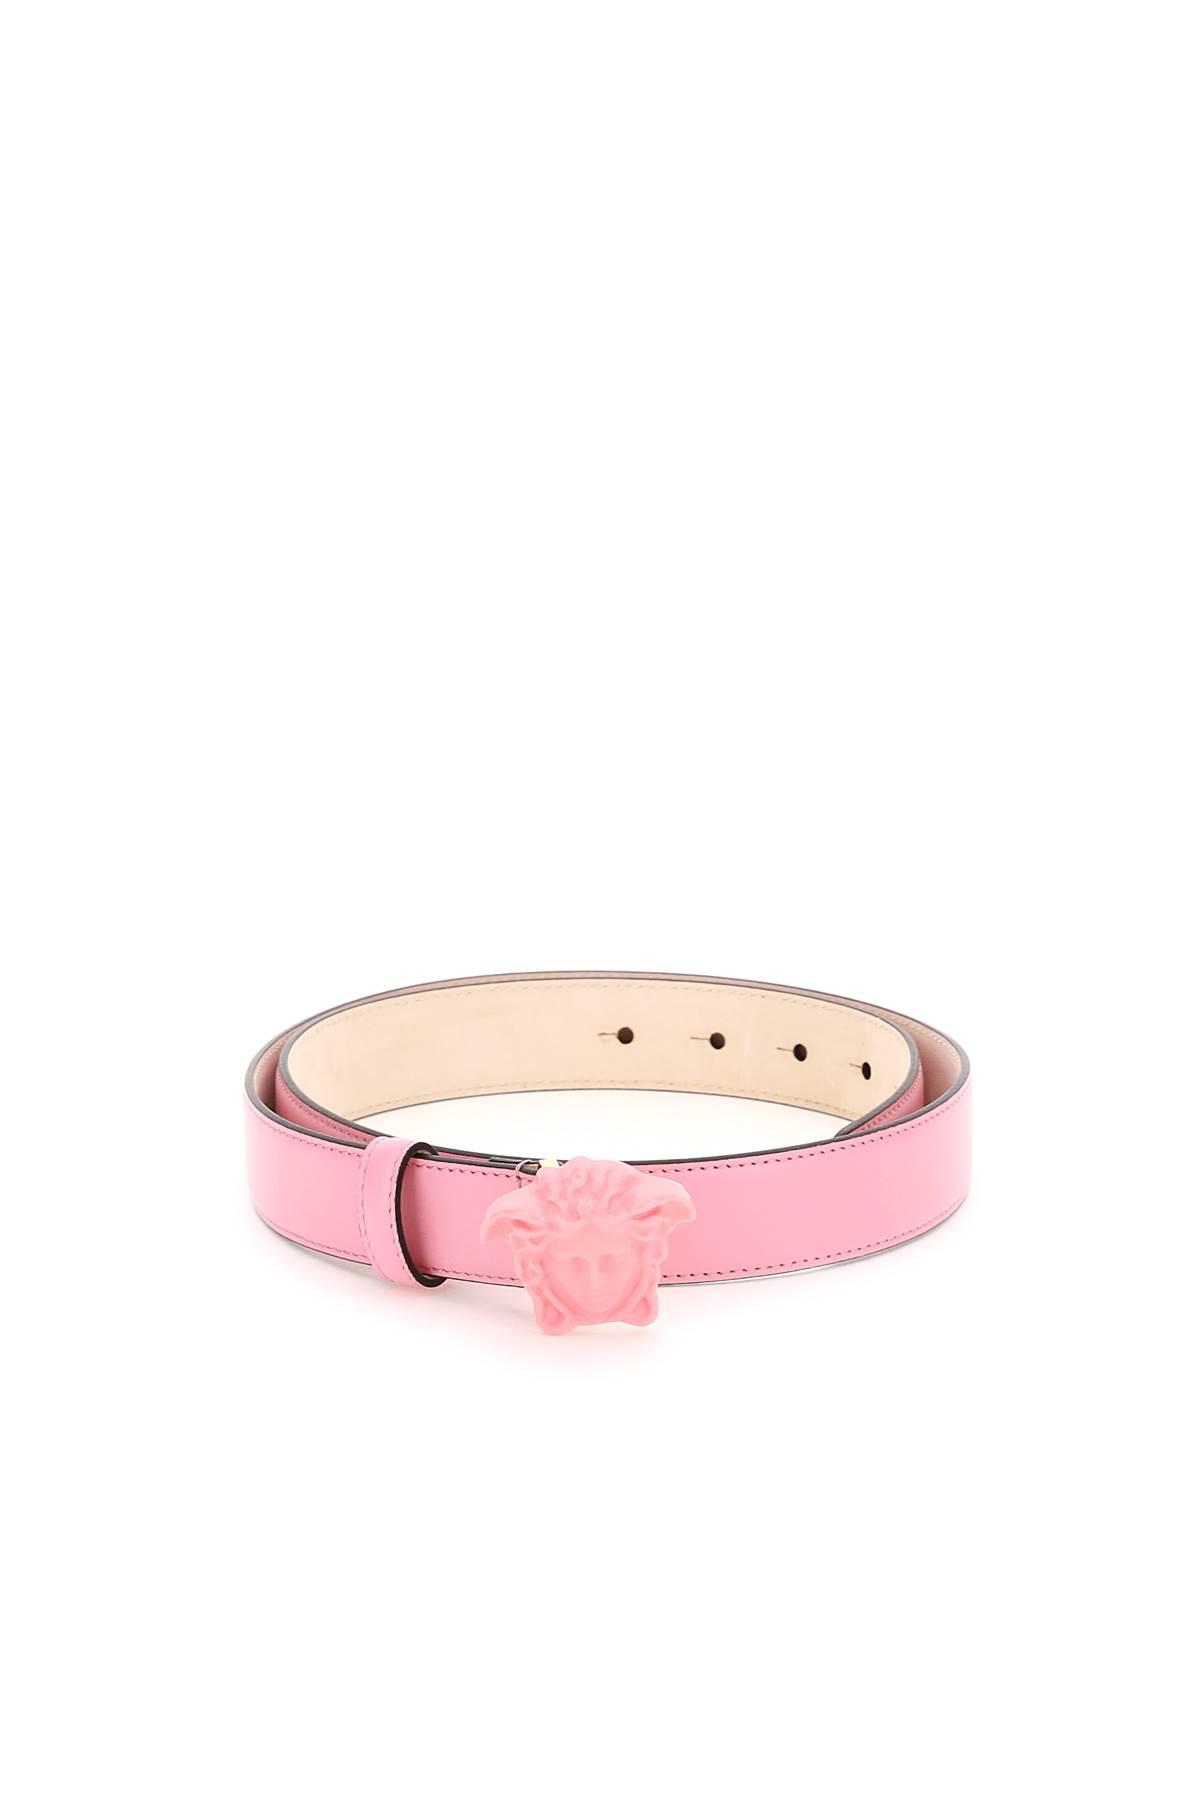 VERSACE Medusa Buckle Baby Pink Leather Belt Size 80 cm / 32 New With Tag